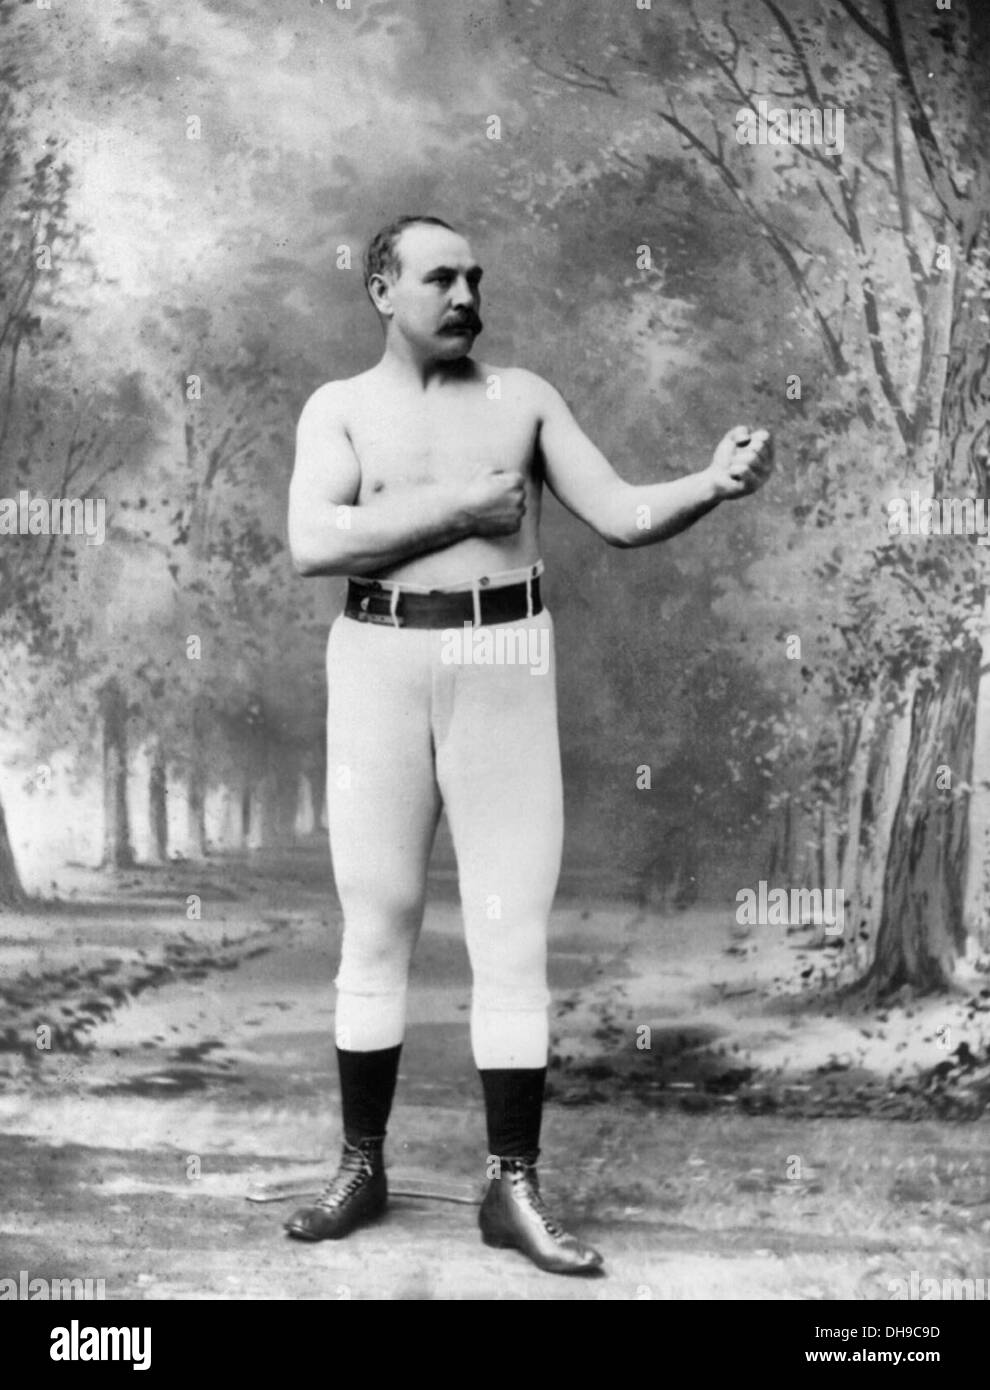 jem-mace-1831-1910-standing-with-fists-raised-english-boxing-champion-DH9C9D.jpg